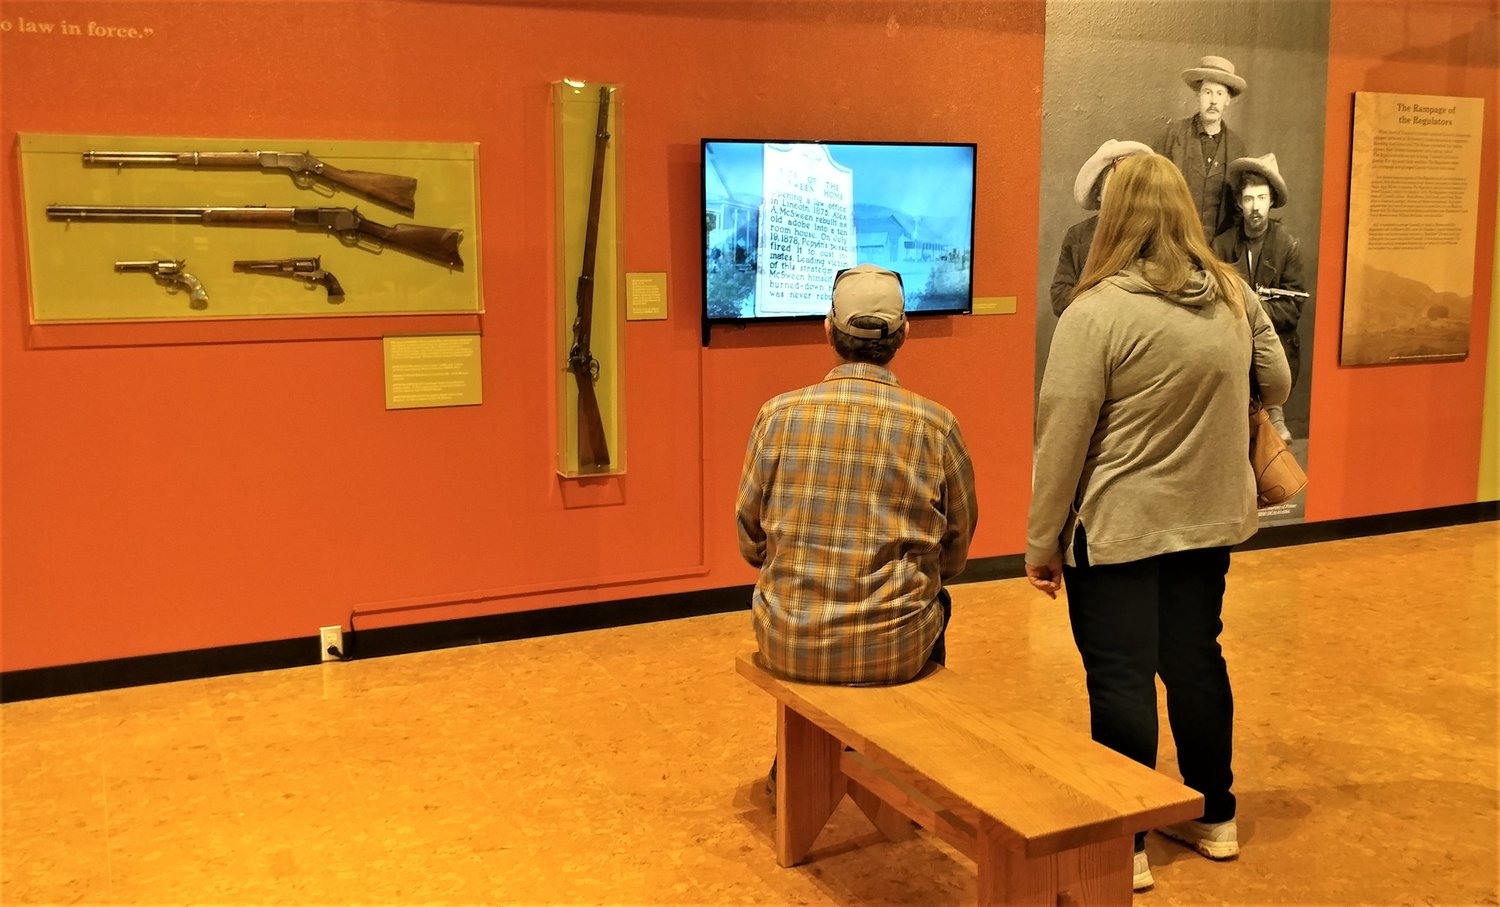 The “Riding Herd” exhibit includes a four-minute video about the Lincoln County War.